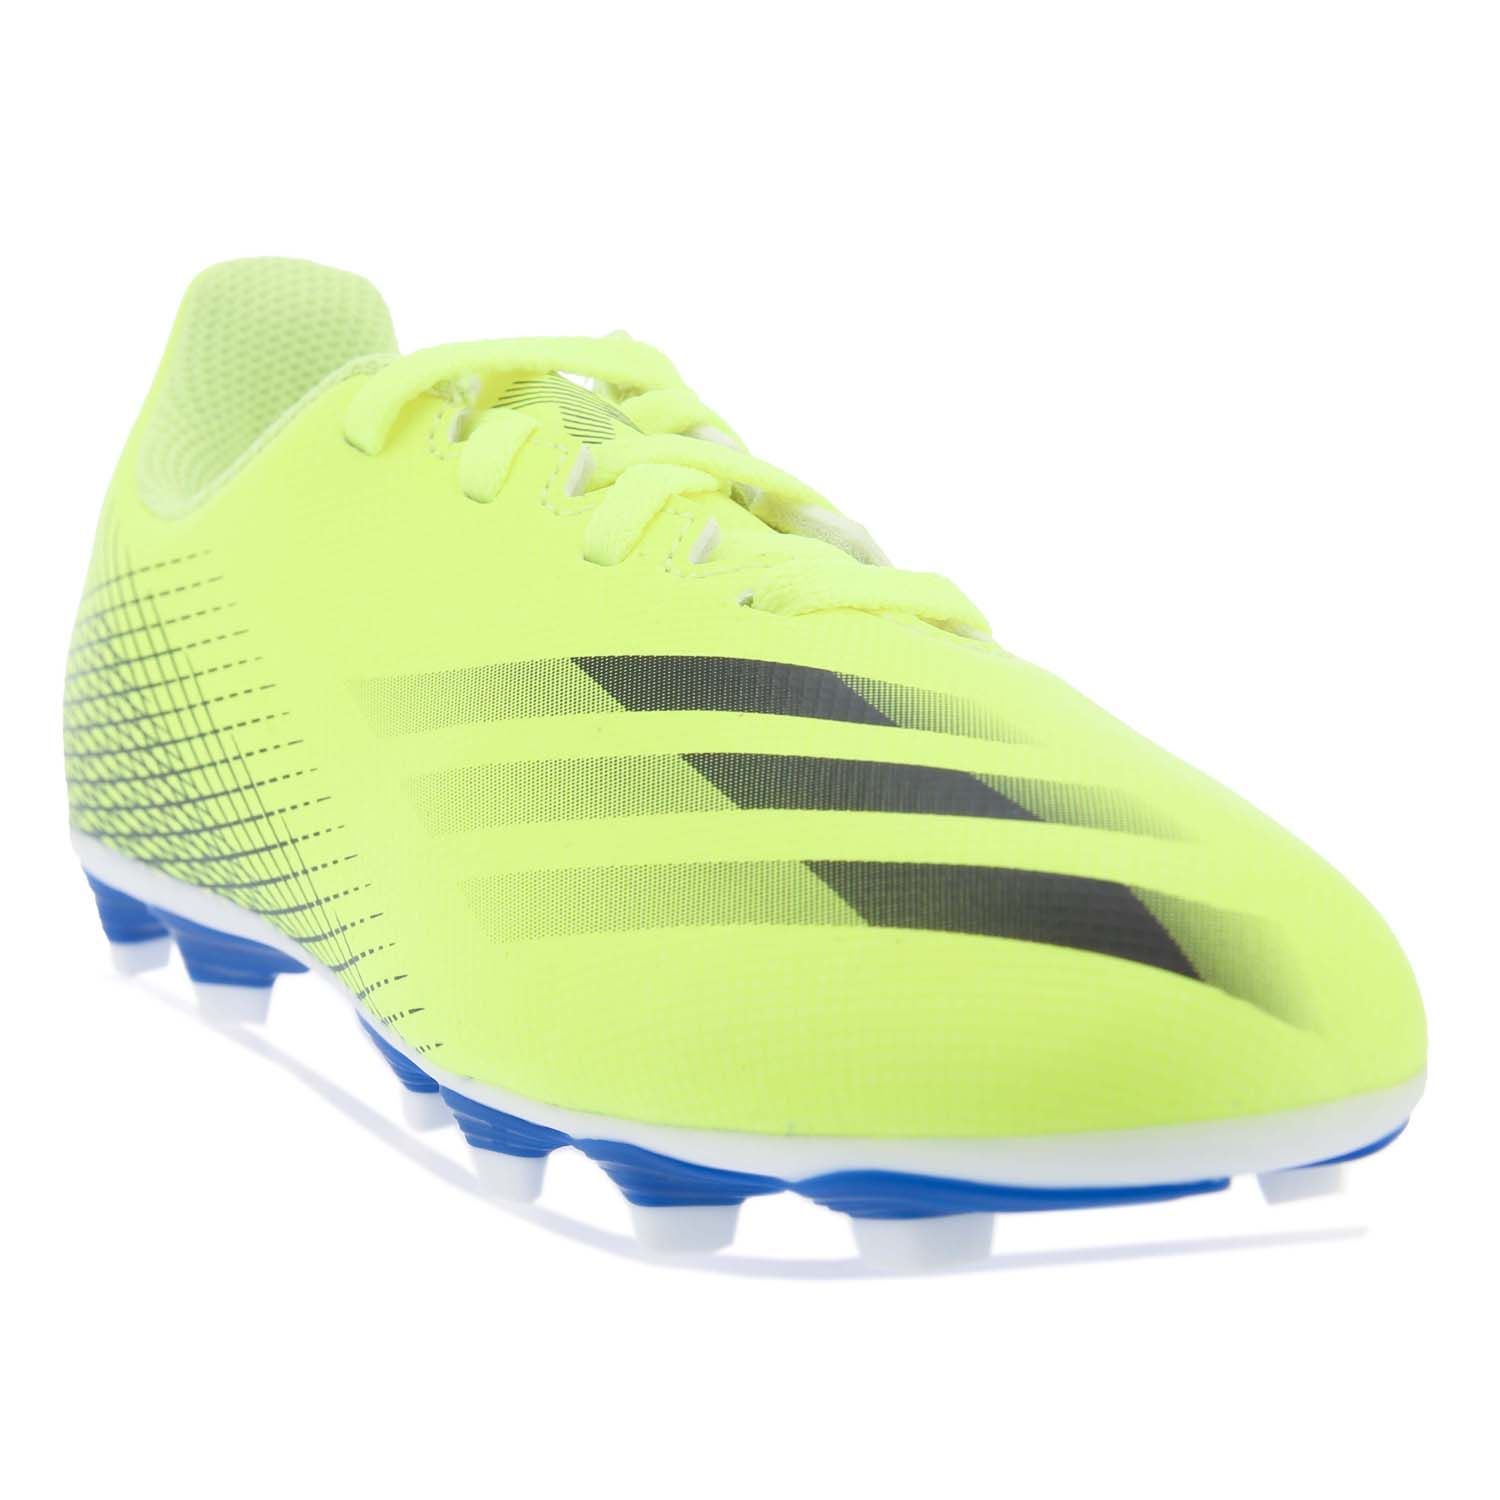 Children Boys adidas X Ghosted.4 FxG Football Boots in yellow.- Lightweight synthetic upper. - Lace closure. - Low-cut collar. - Padded ankle. - Flexible ground outsole.- Synthetic upper  Textile lining  Synthetic sole.  - Ref.: FW6933C